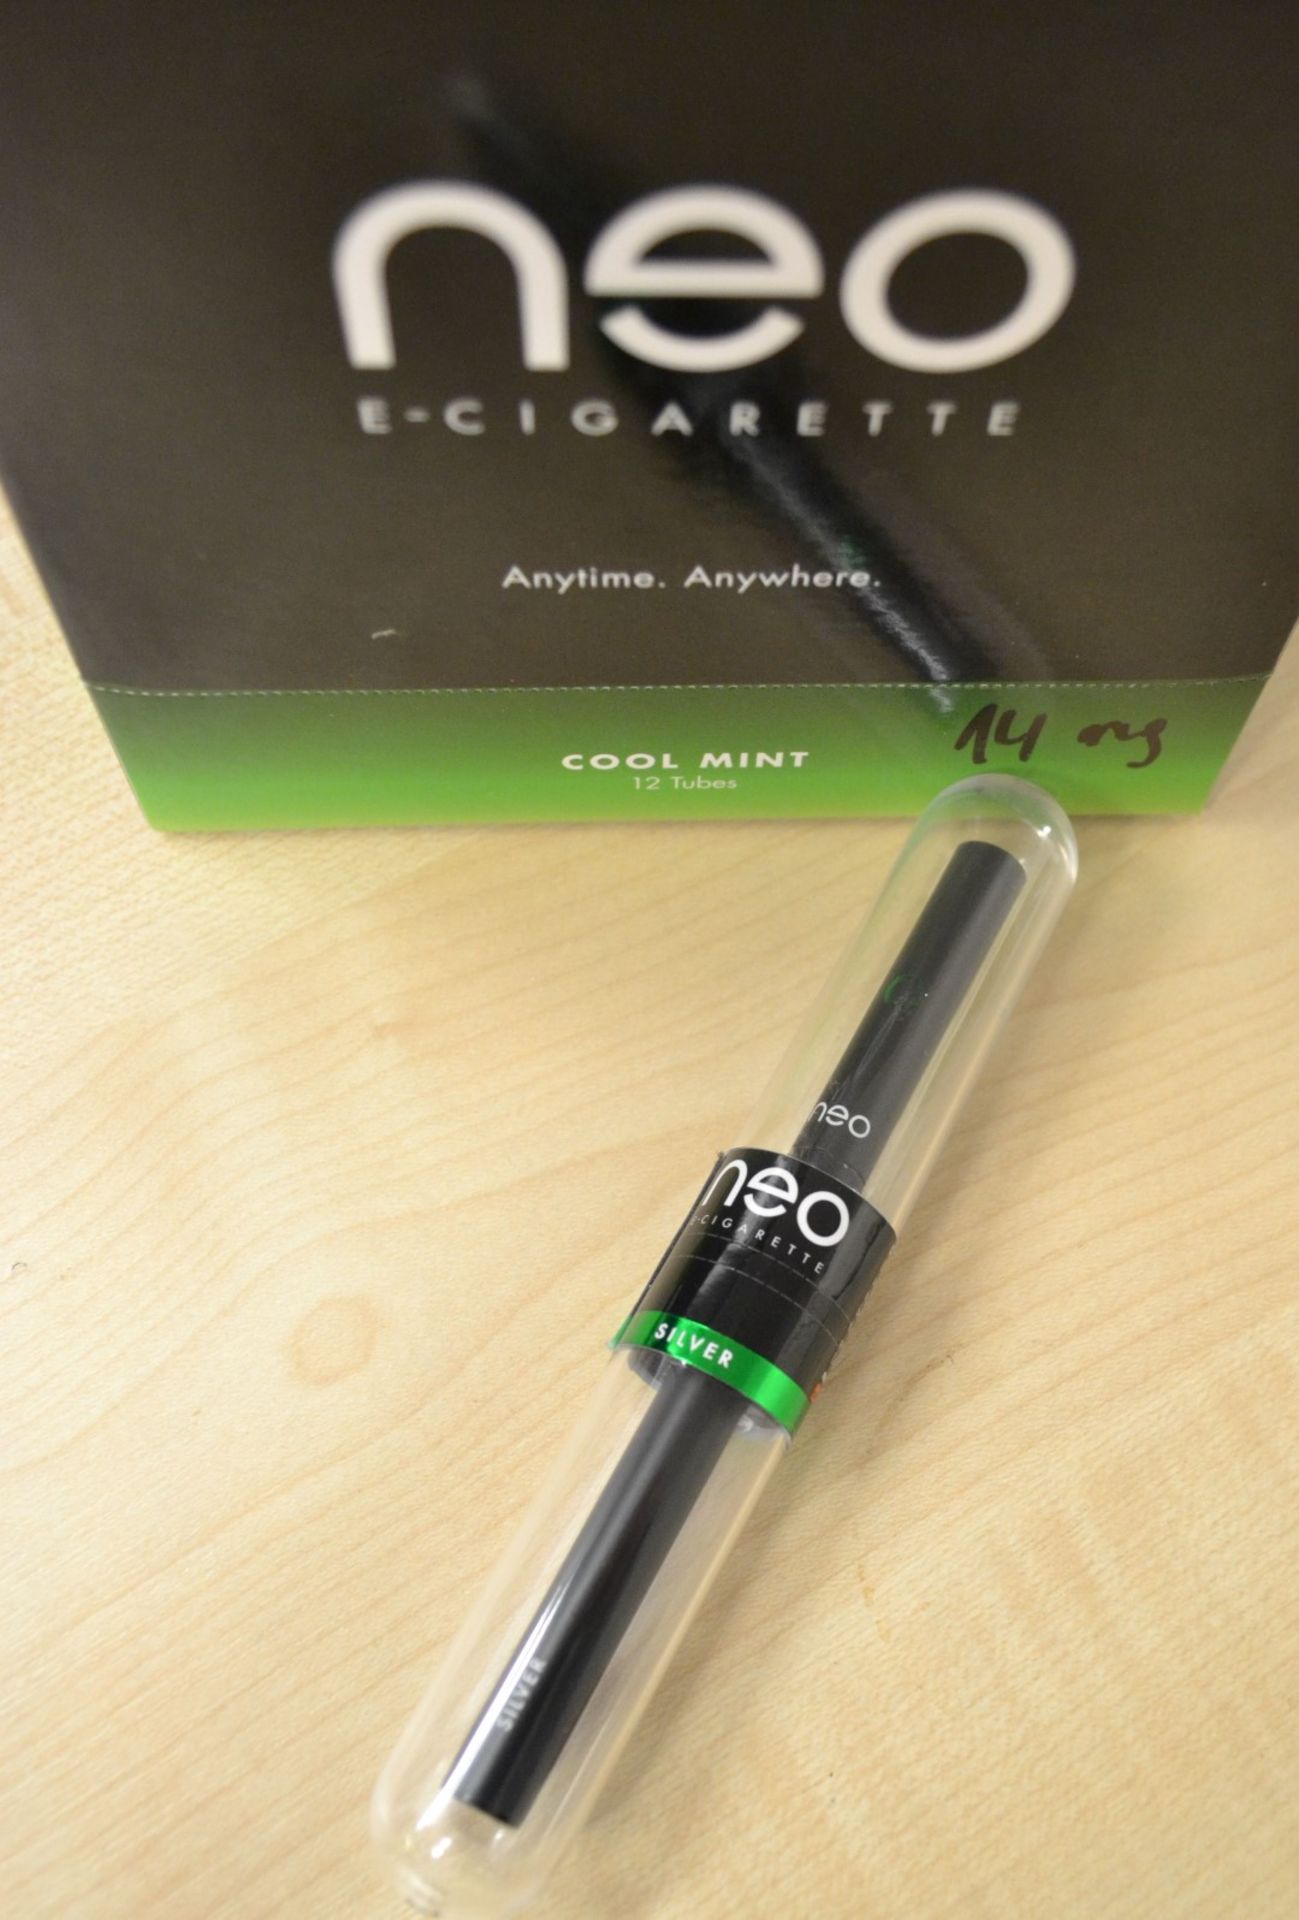 216 x Neo E-Cigarettes Cool Mint Disposable Electronic Cigarettes - New & Sealed Stock - CL185 - Ref - Image 7 of 8